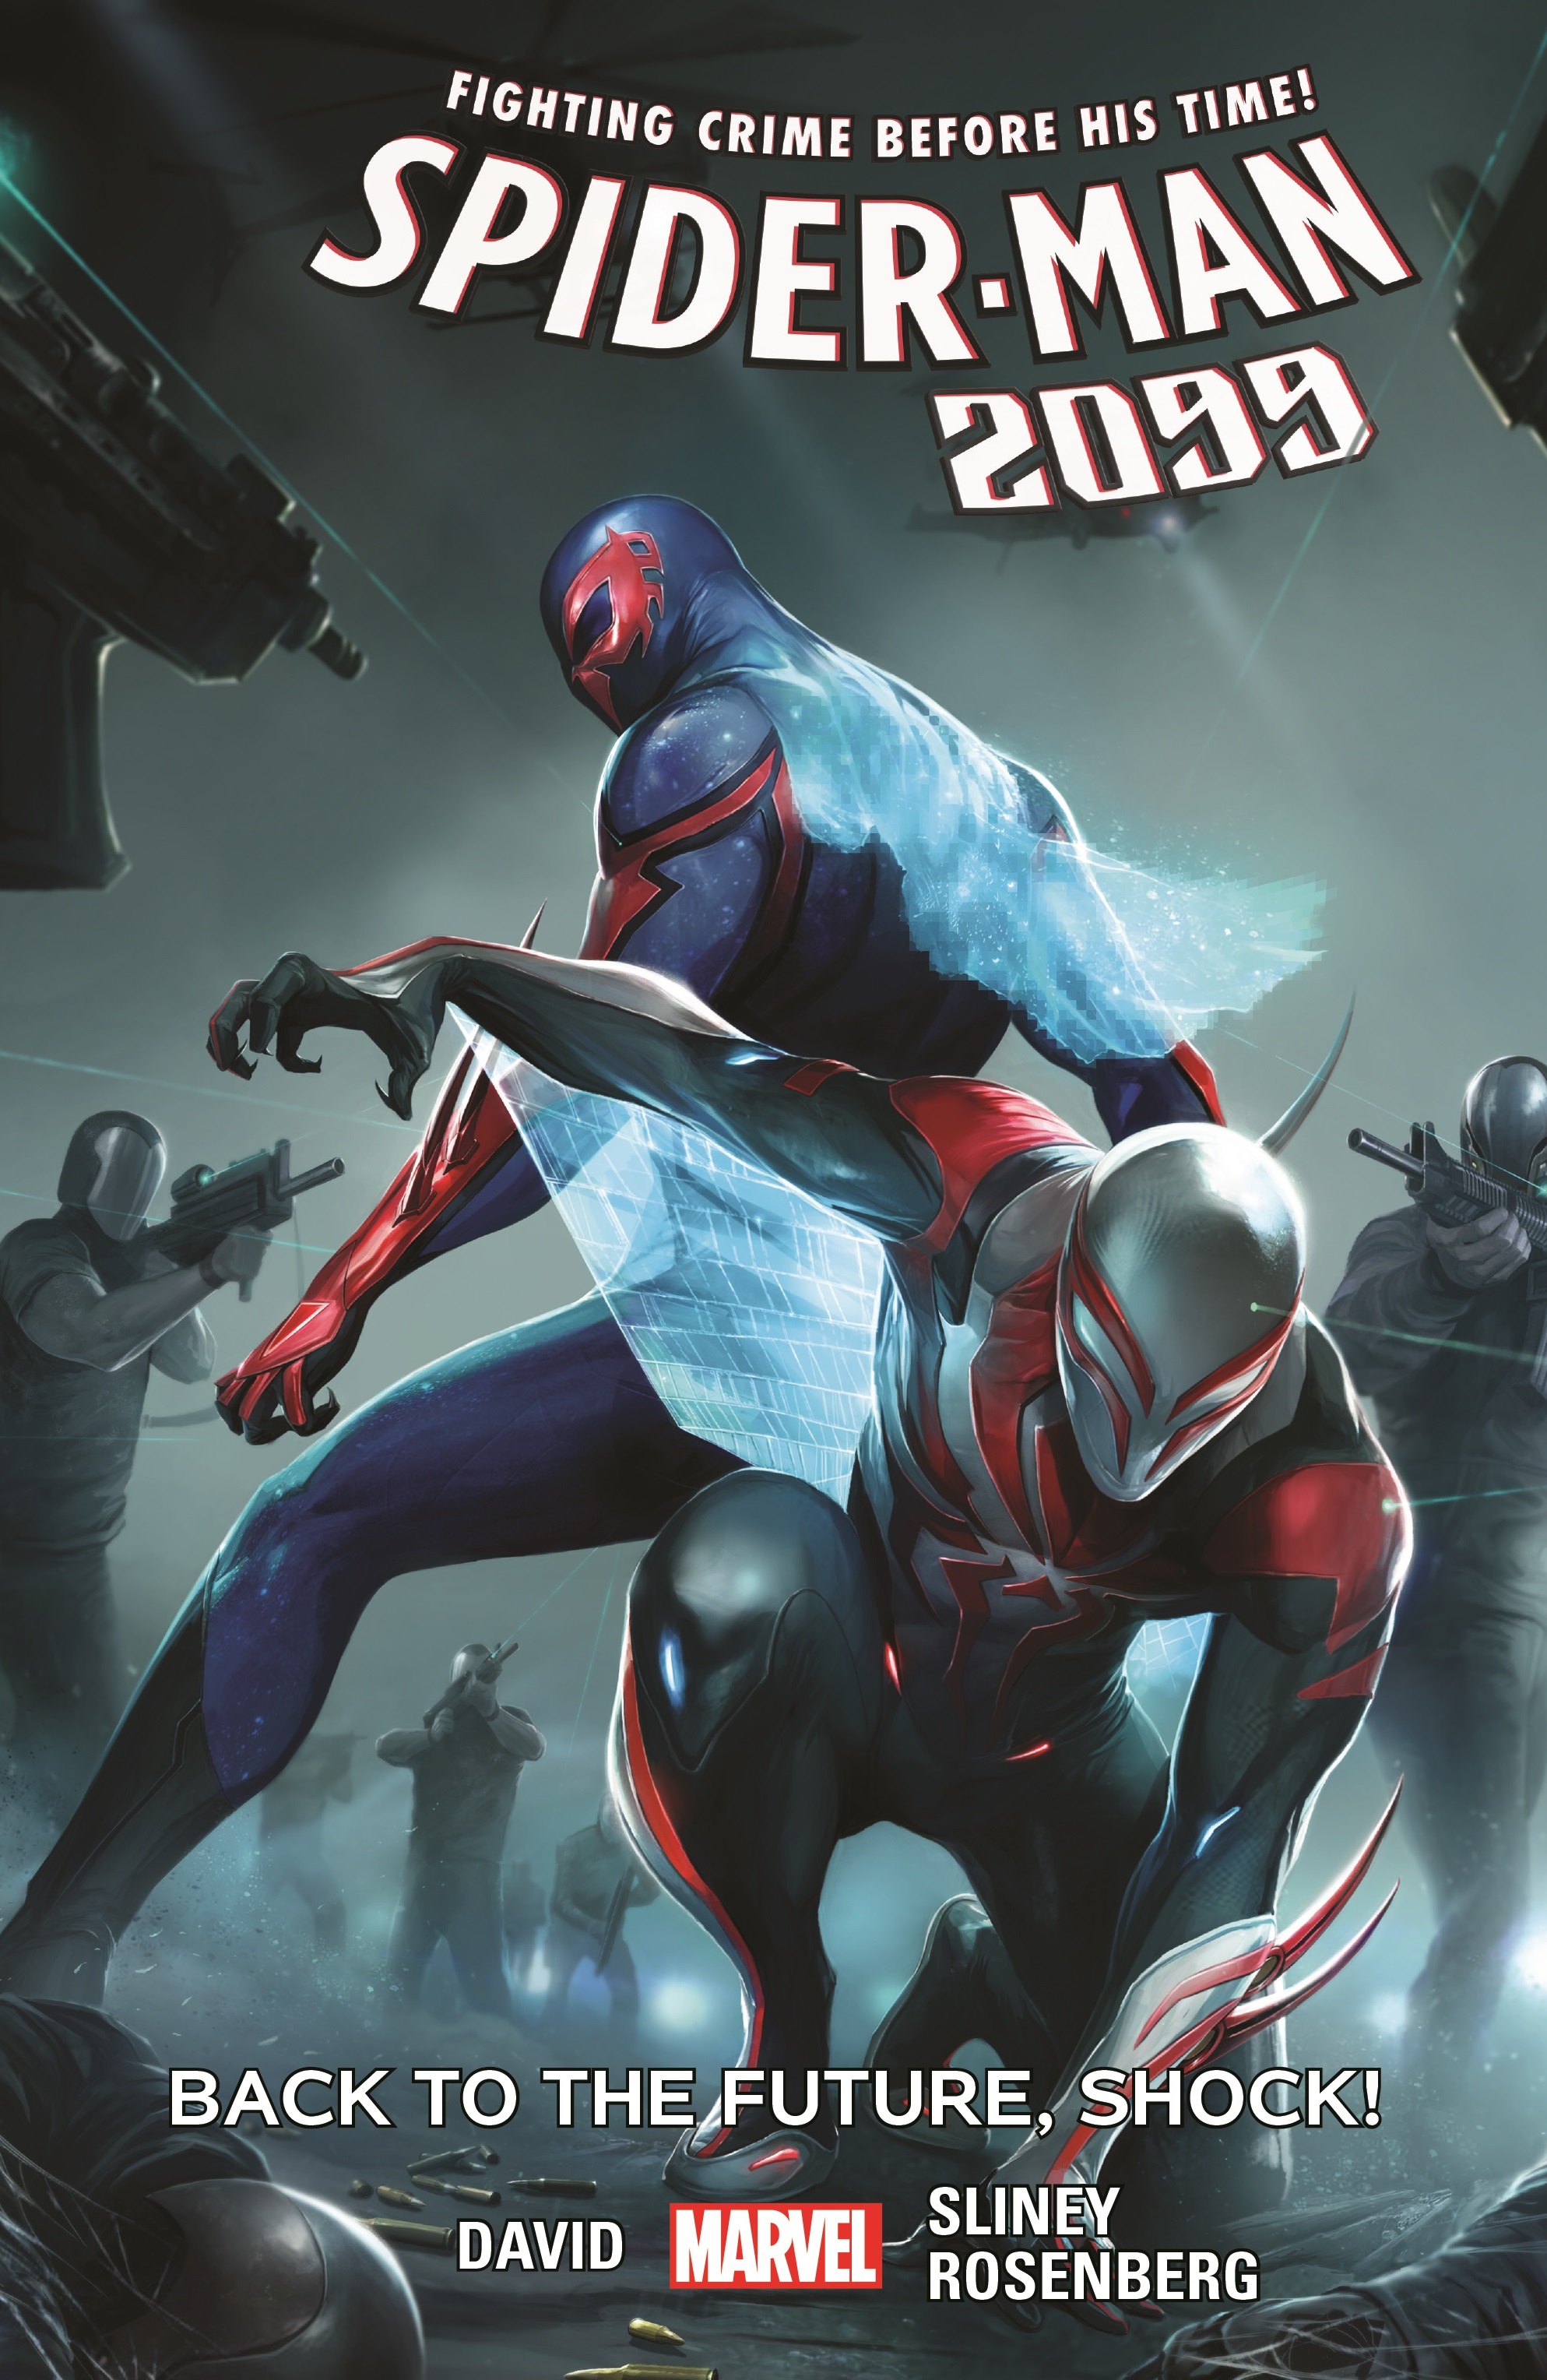 SPIDER-MAN 2099 VOL. 7: BACK TO THE FUTURE, SHOCK! TPB (Trade Paperback)